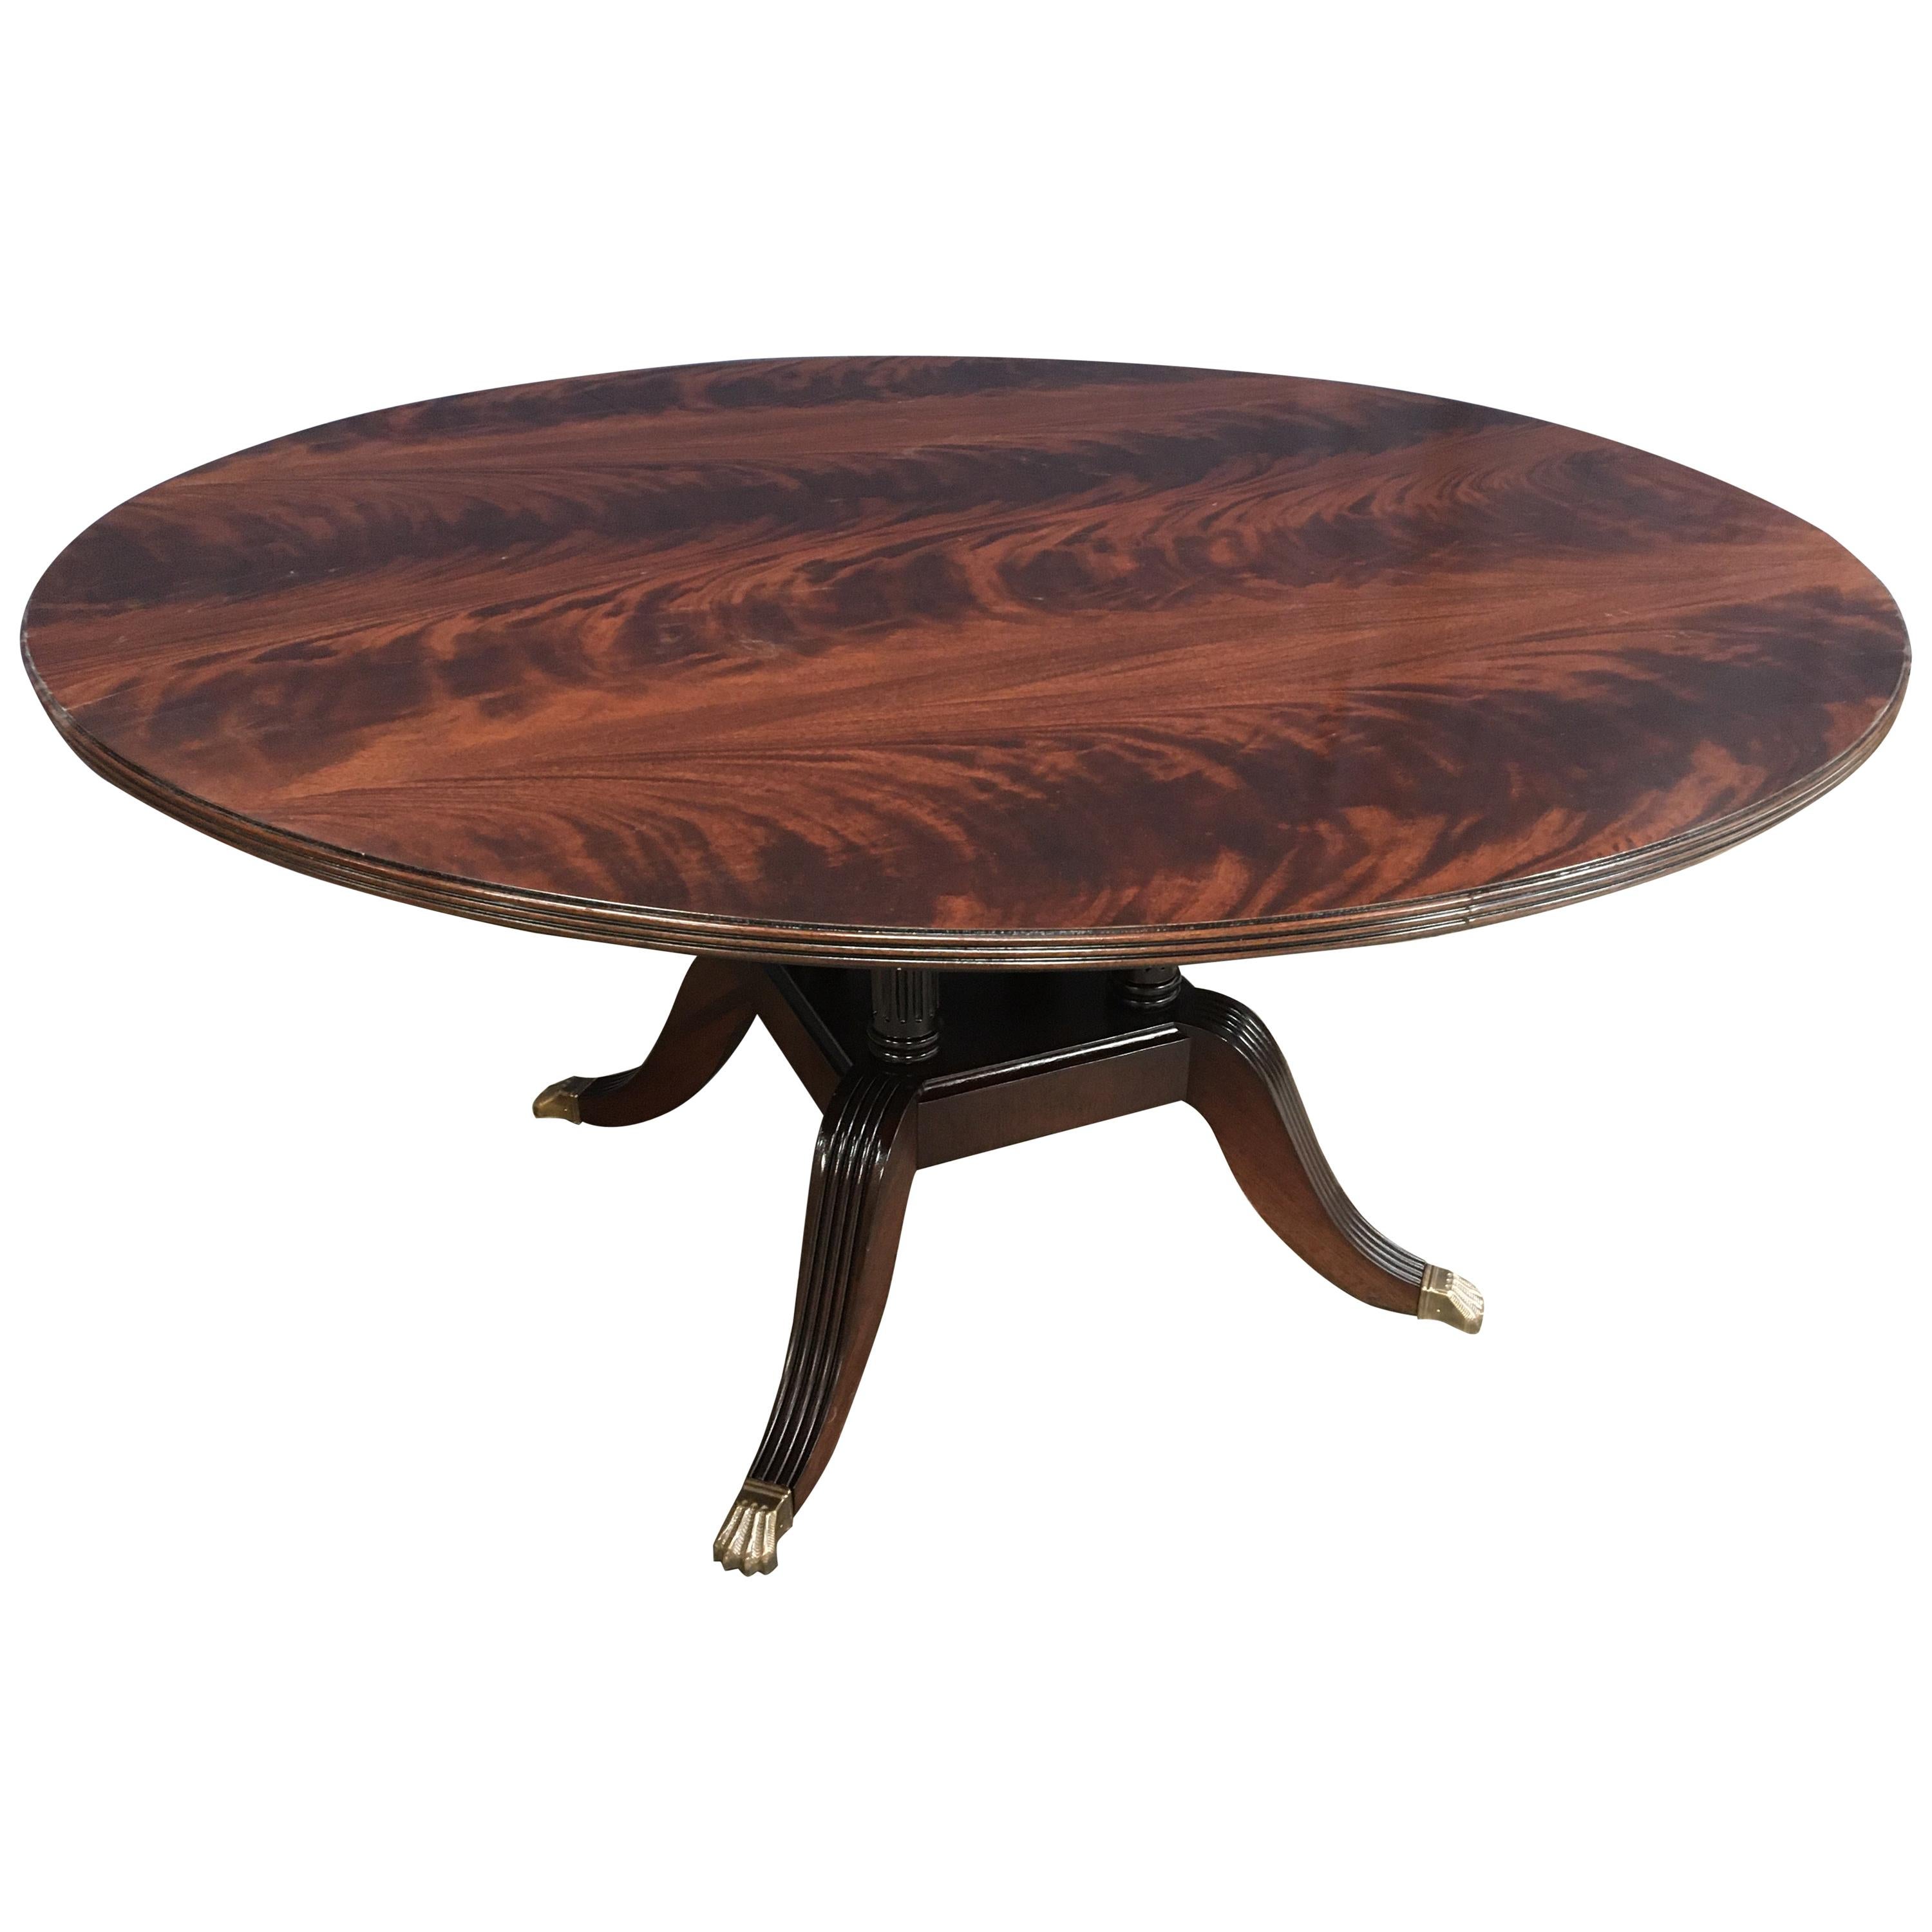 Round Crotch Mahogany Georgian Style Pedestal Dining Table by Leighton Hall For Sale